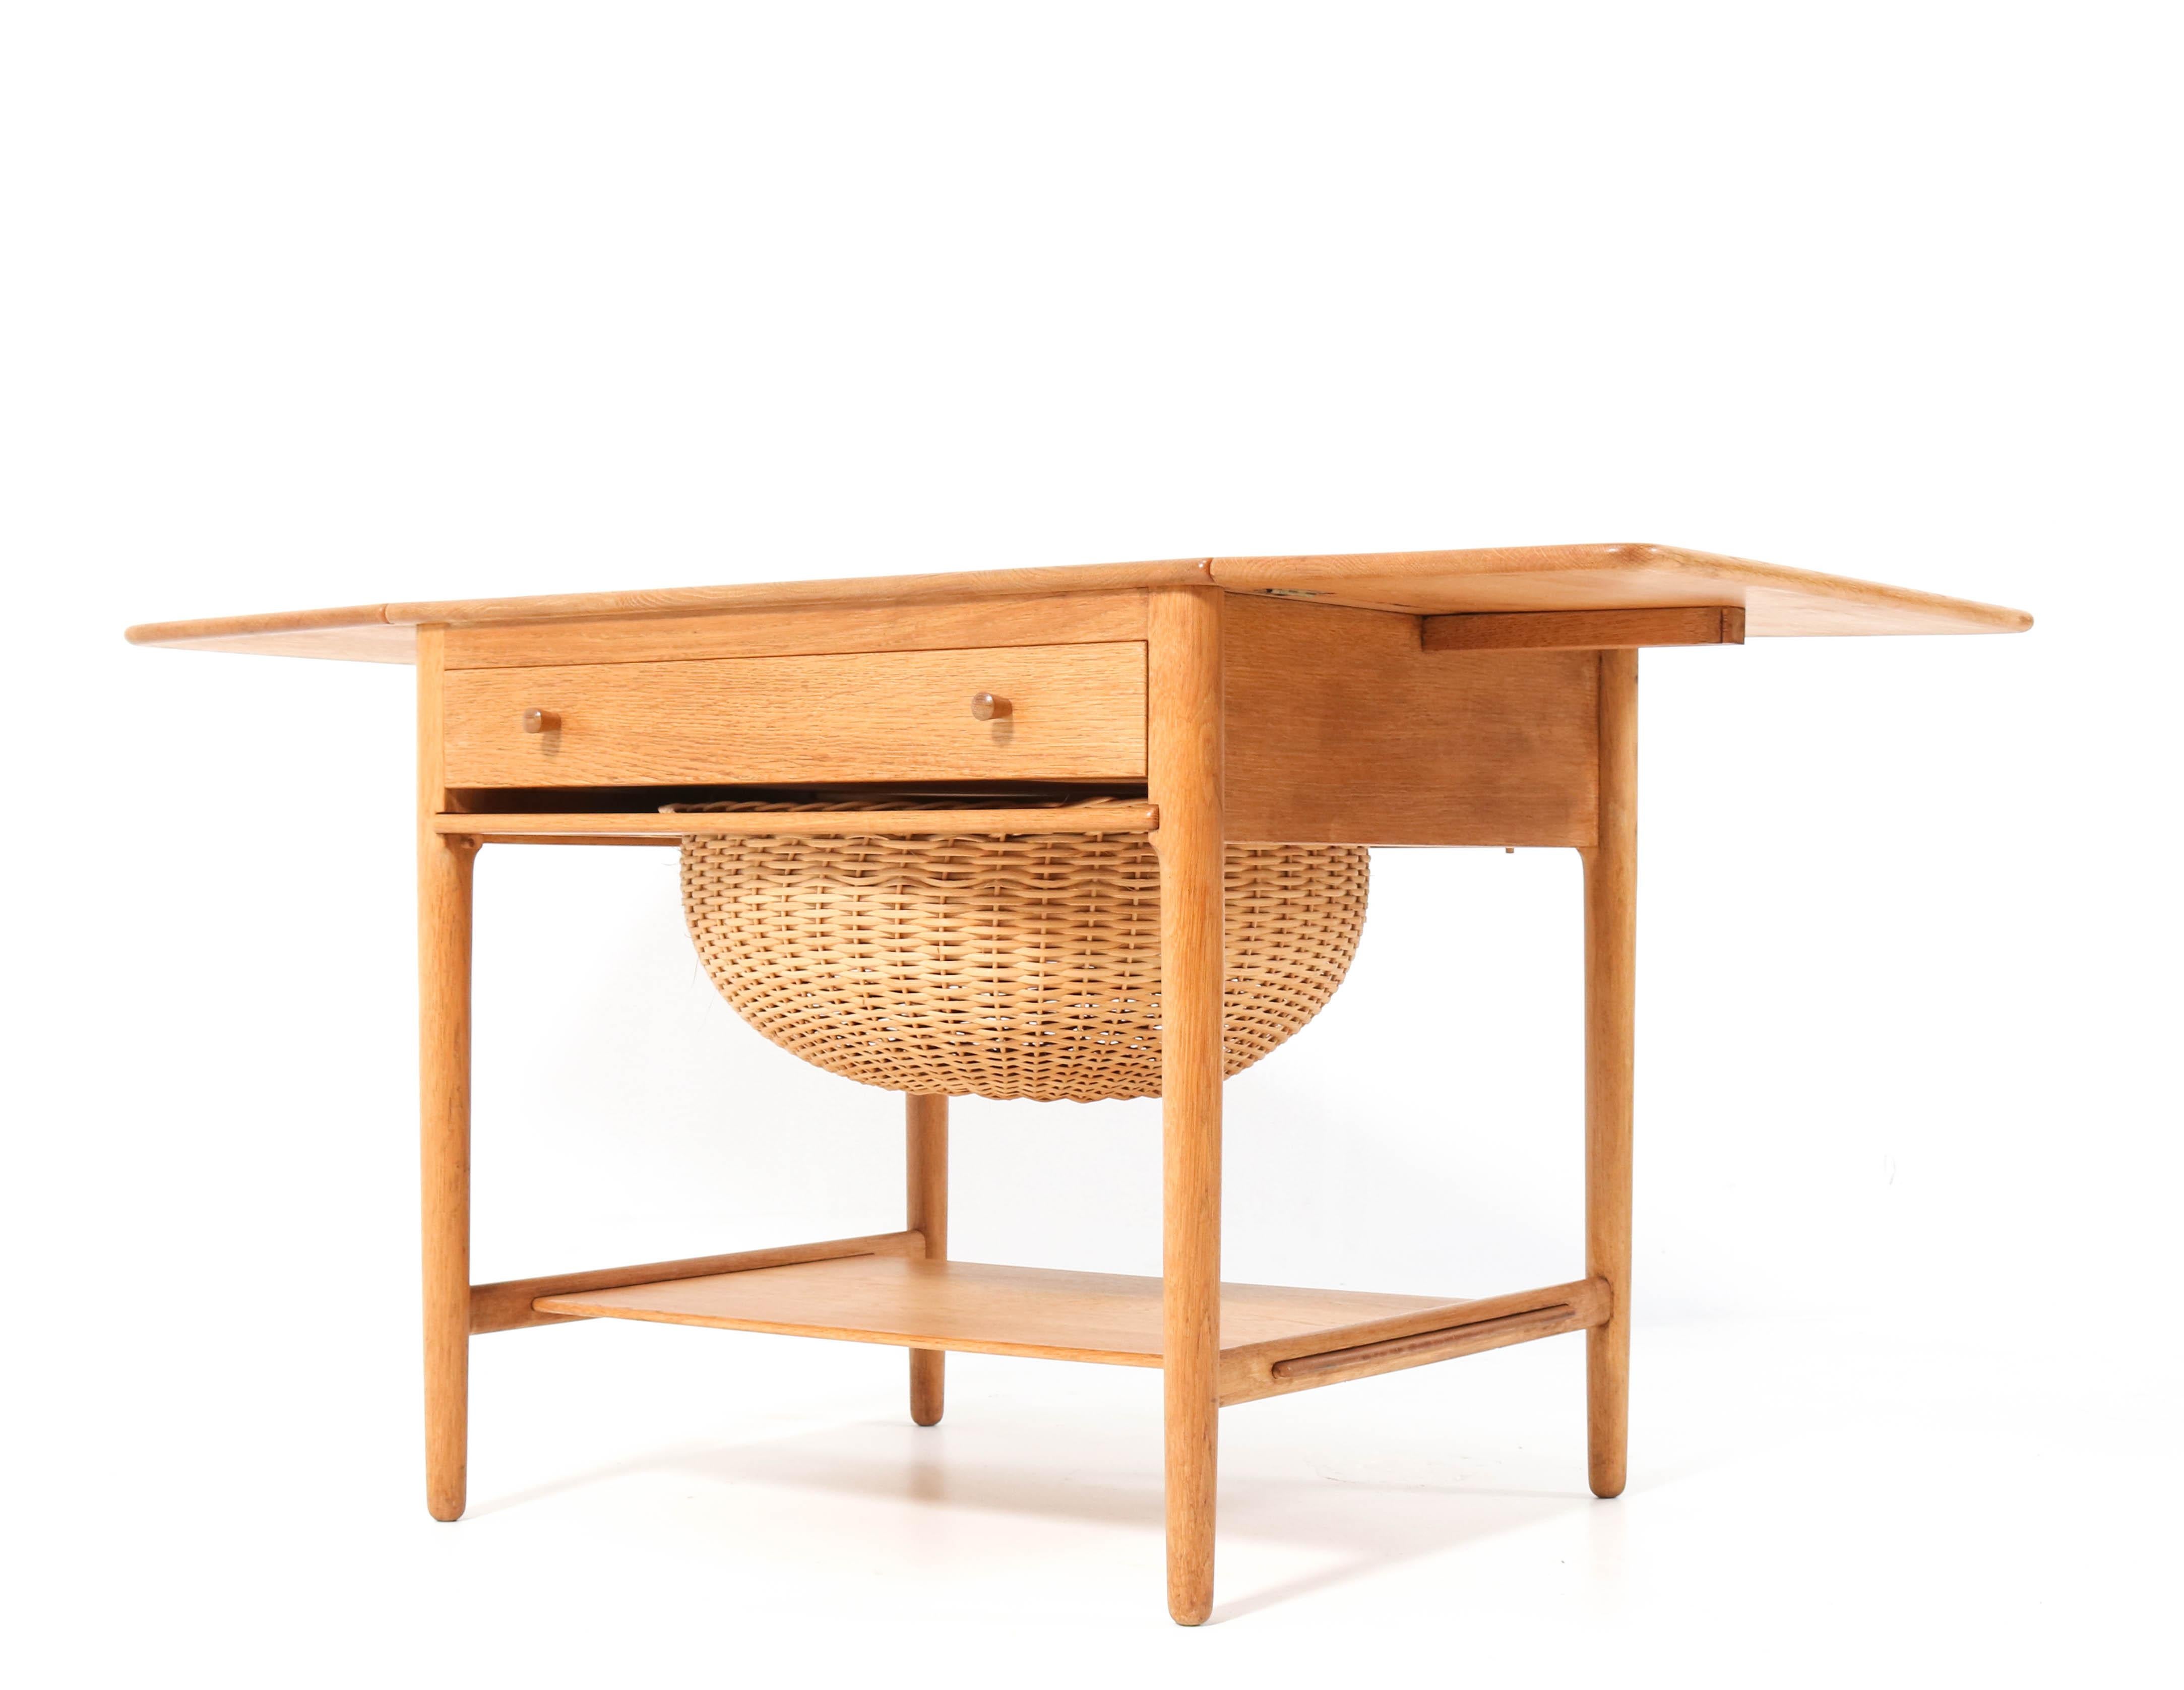 Mid-20th Century Mid-Century Modern AT-33 Sewing Table by Hans J. Wegner for Andreas Tuck, 1950s